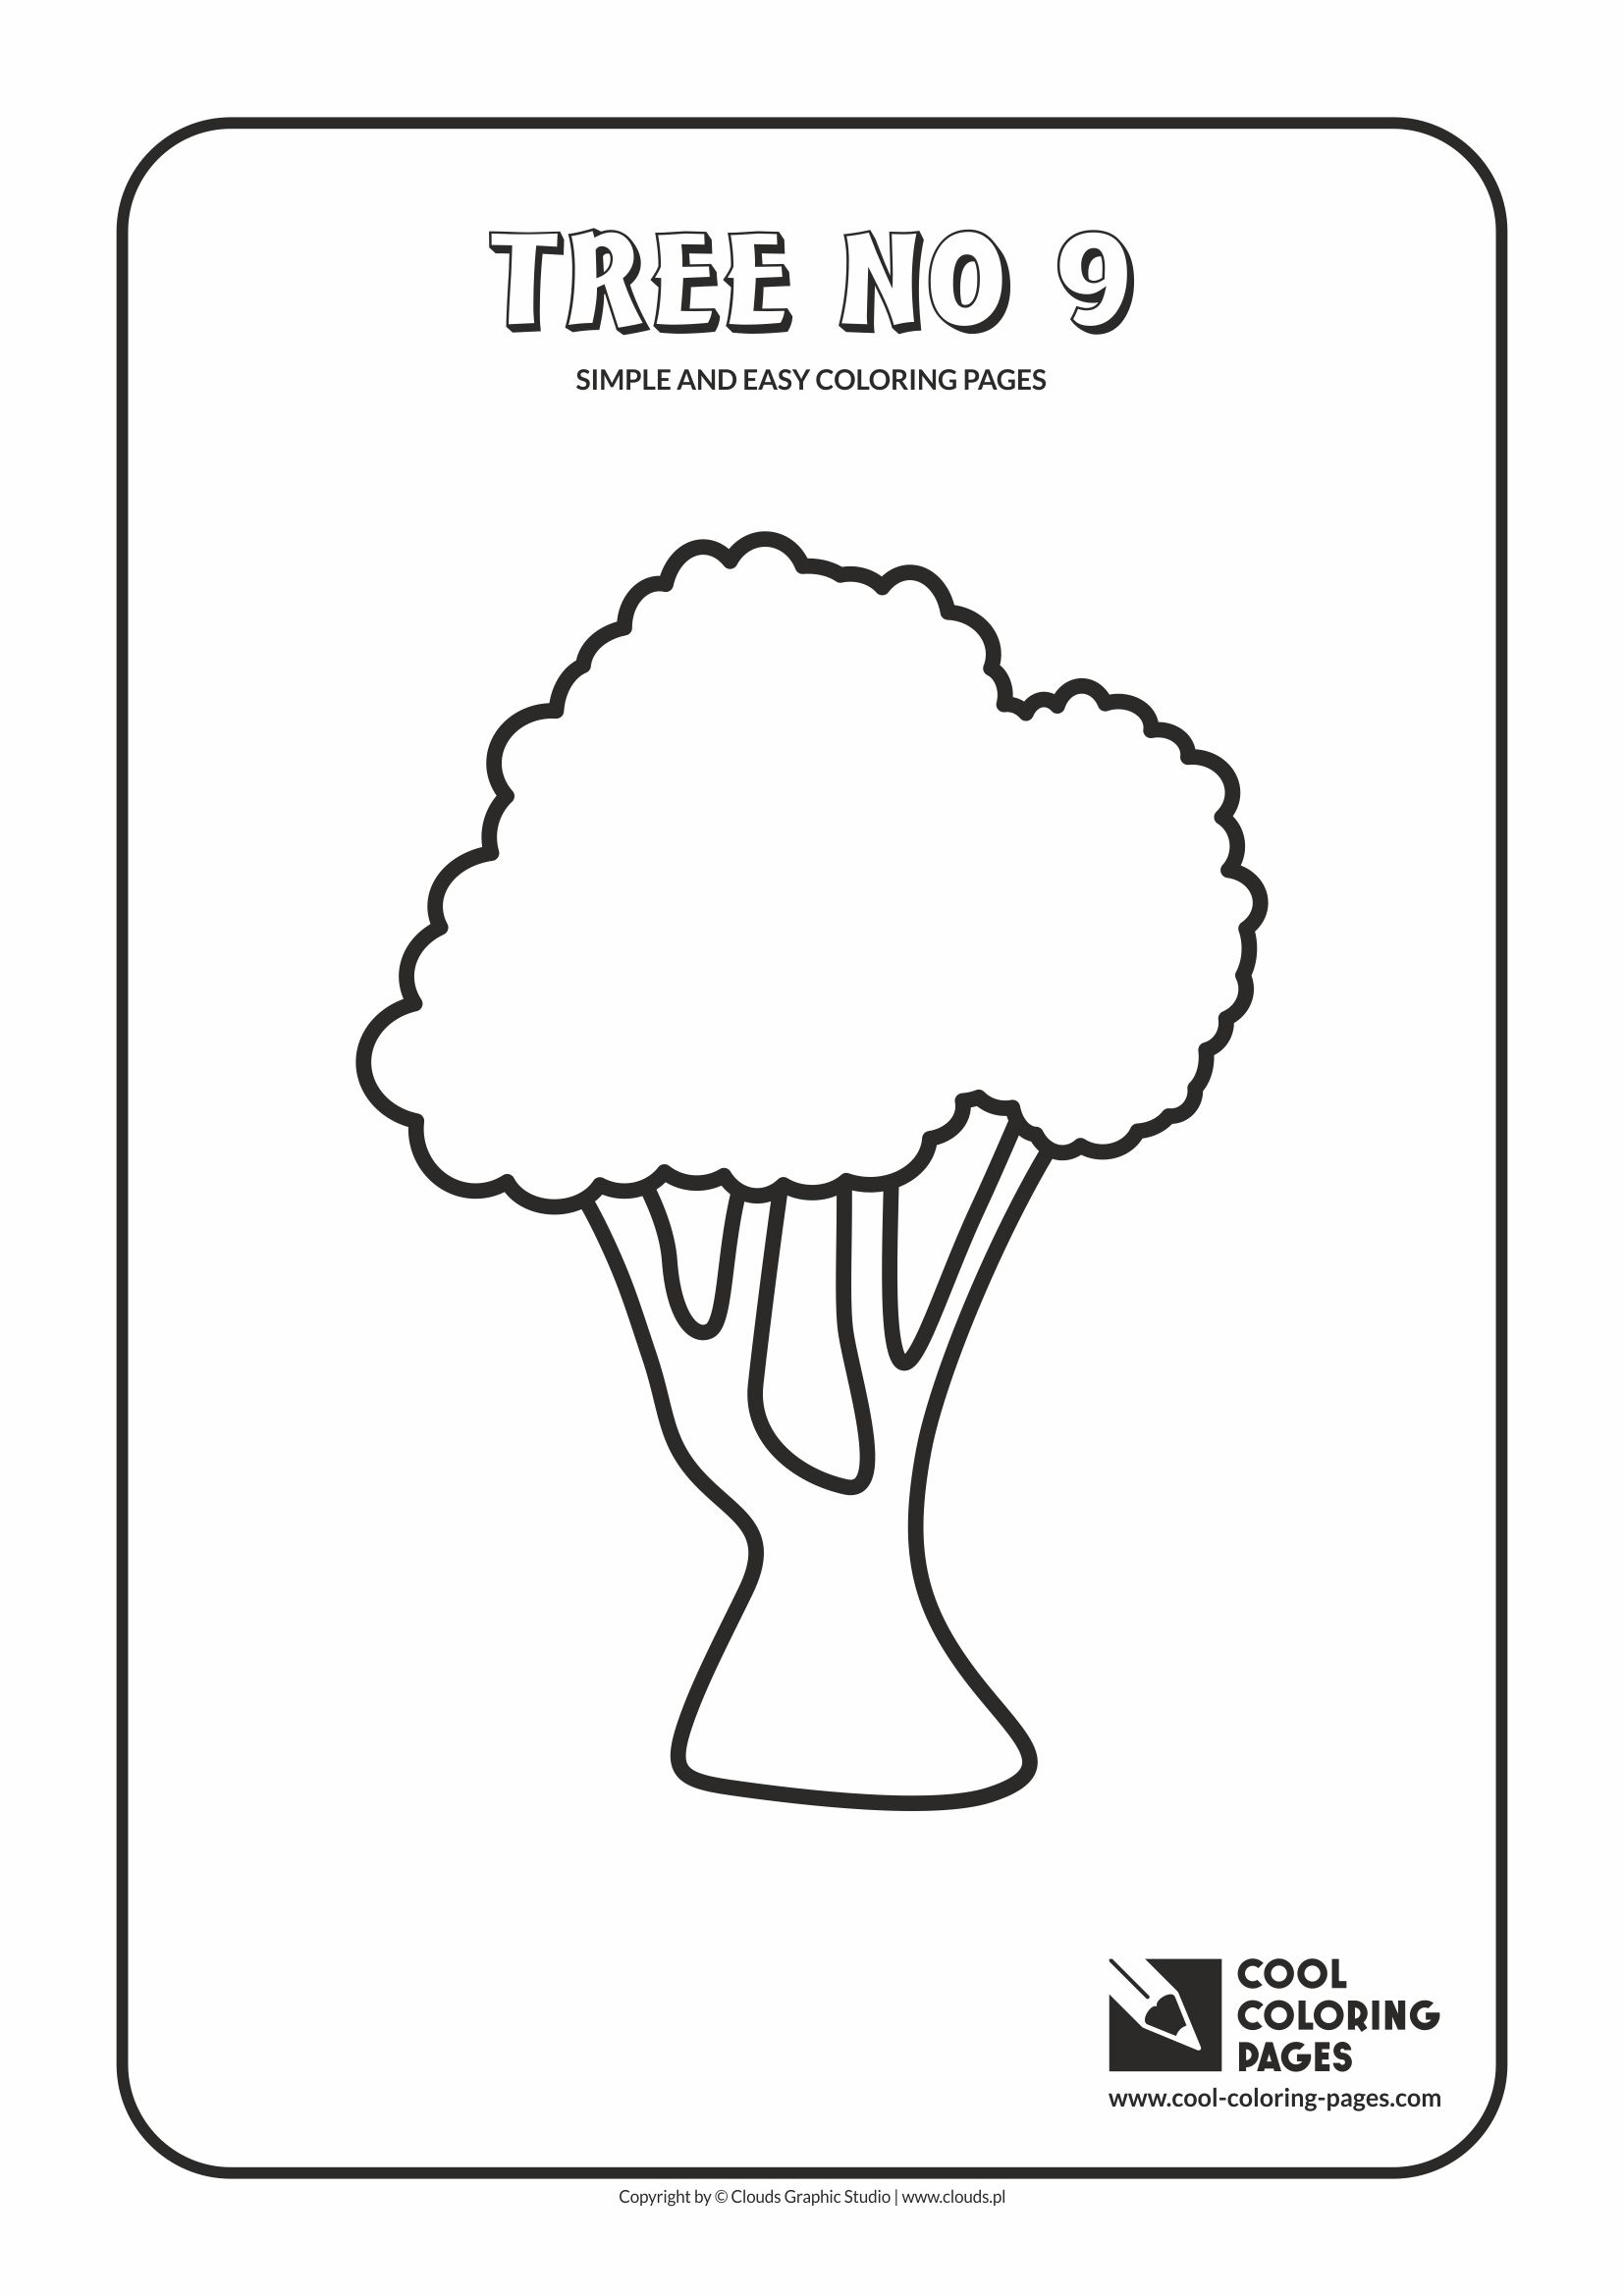 Simple and easy coloring pages for toddlers - Tree no 9